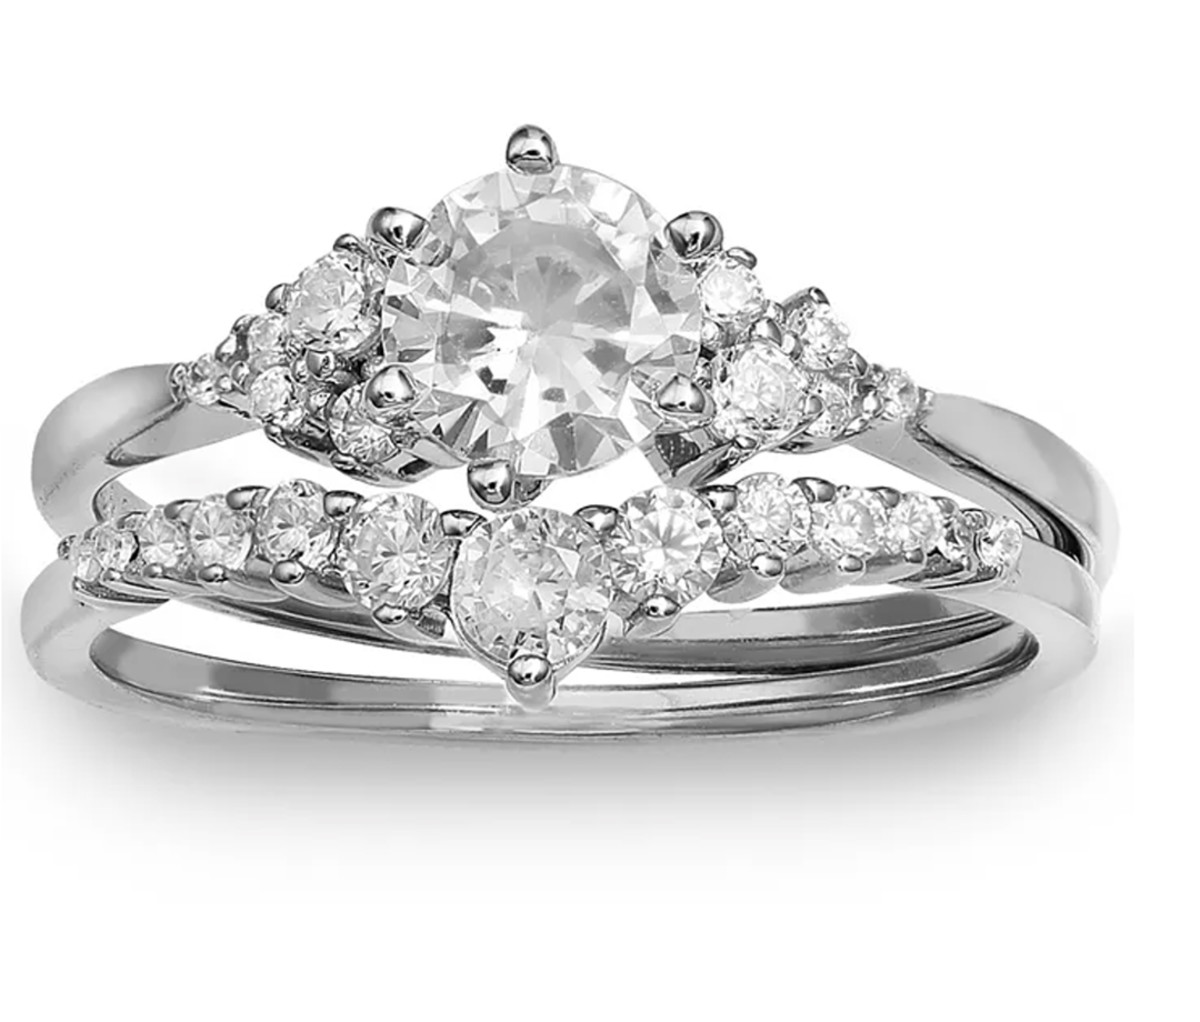 10 Reasons Why You Should Buy a Cubic Zirconia Engagement Ring - Satéur  Official